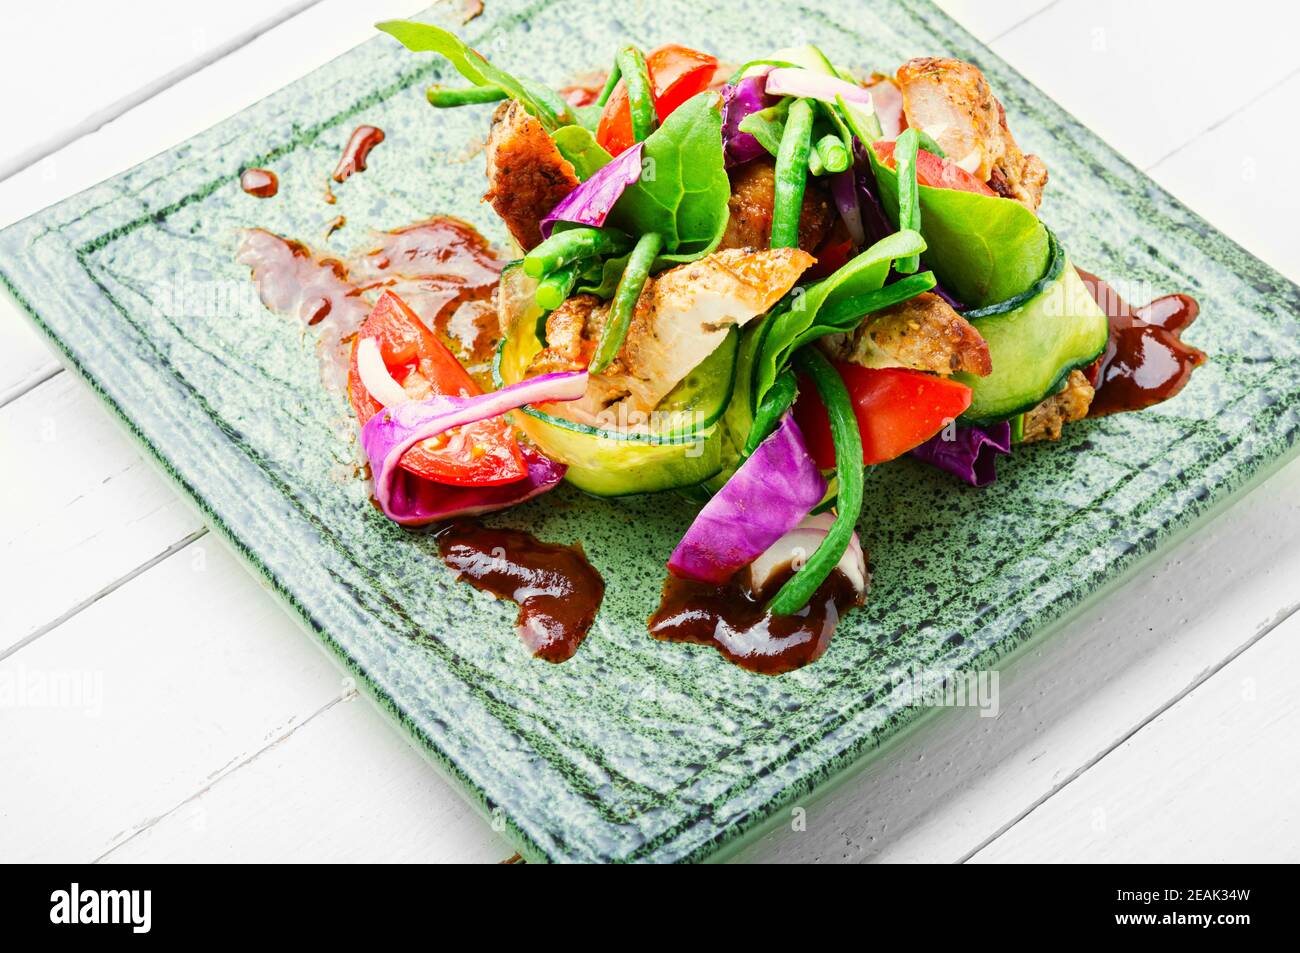 Vegetable salad with meat Stock Photo